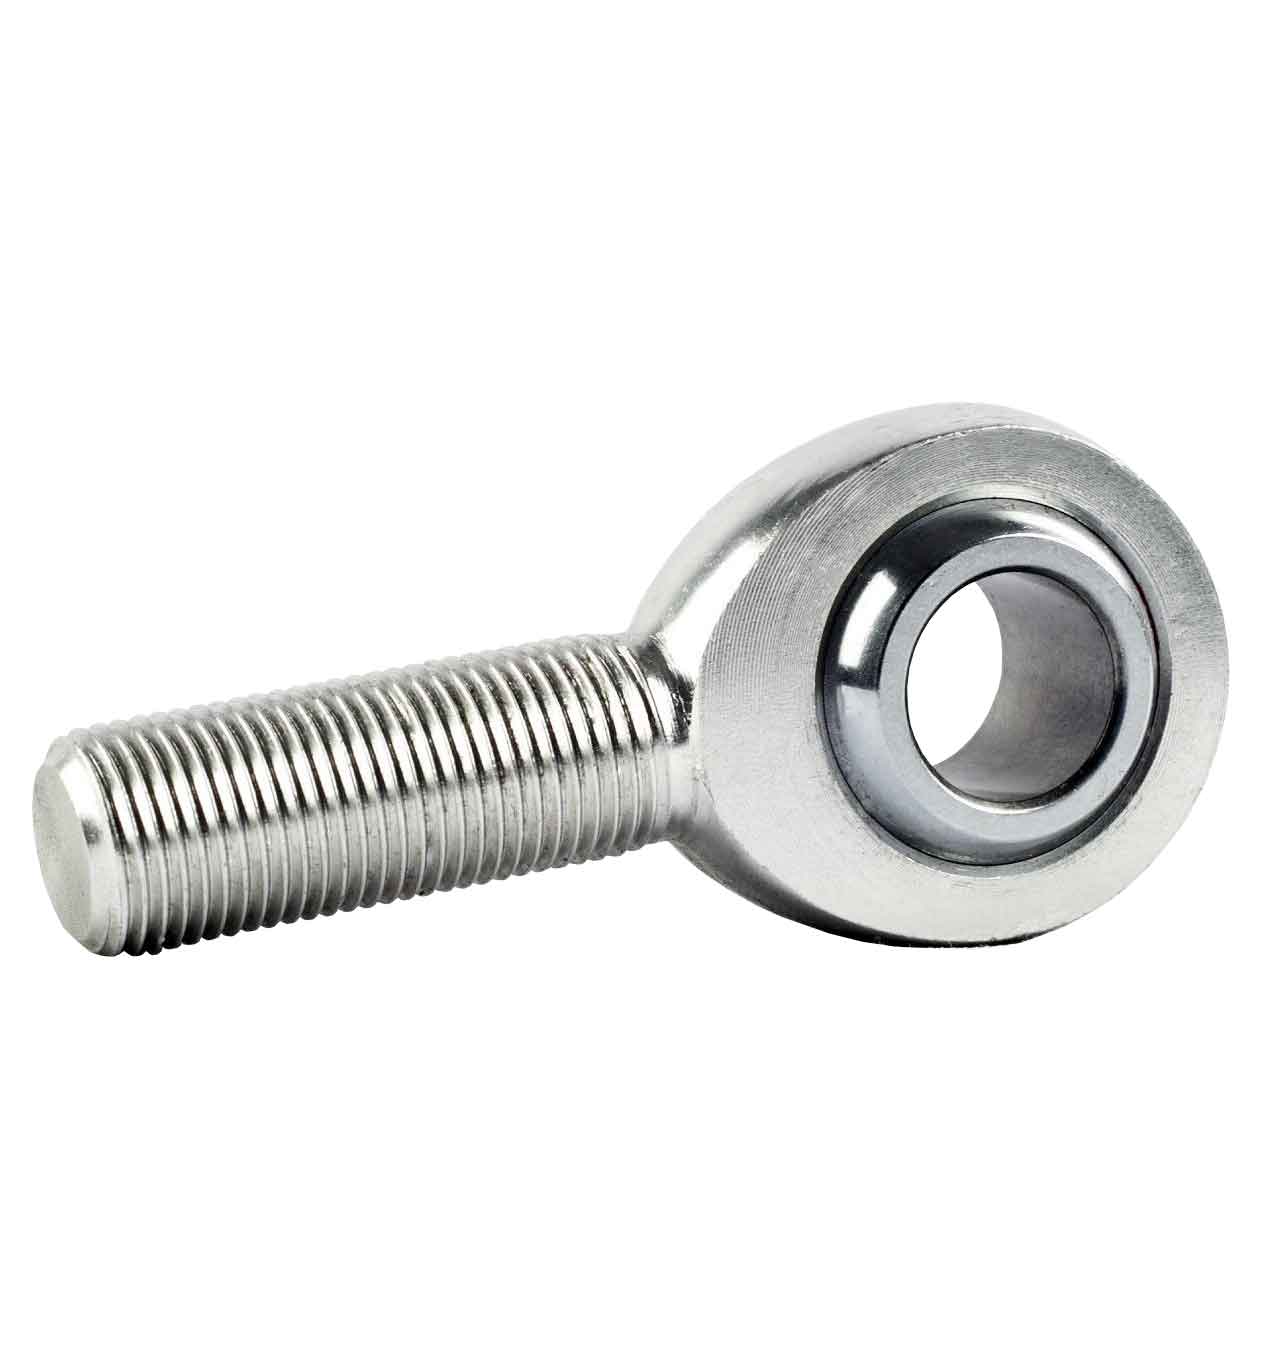 SS-POS30 GENERIC 30mm M30X2 STAINLESS STEEL MALE ROD END BEARING Thumbnail